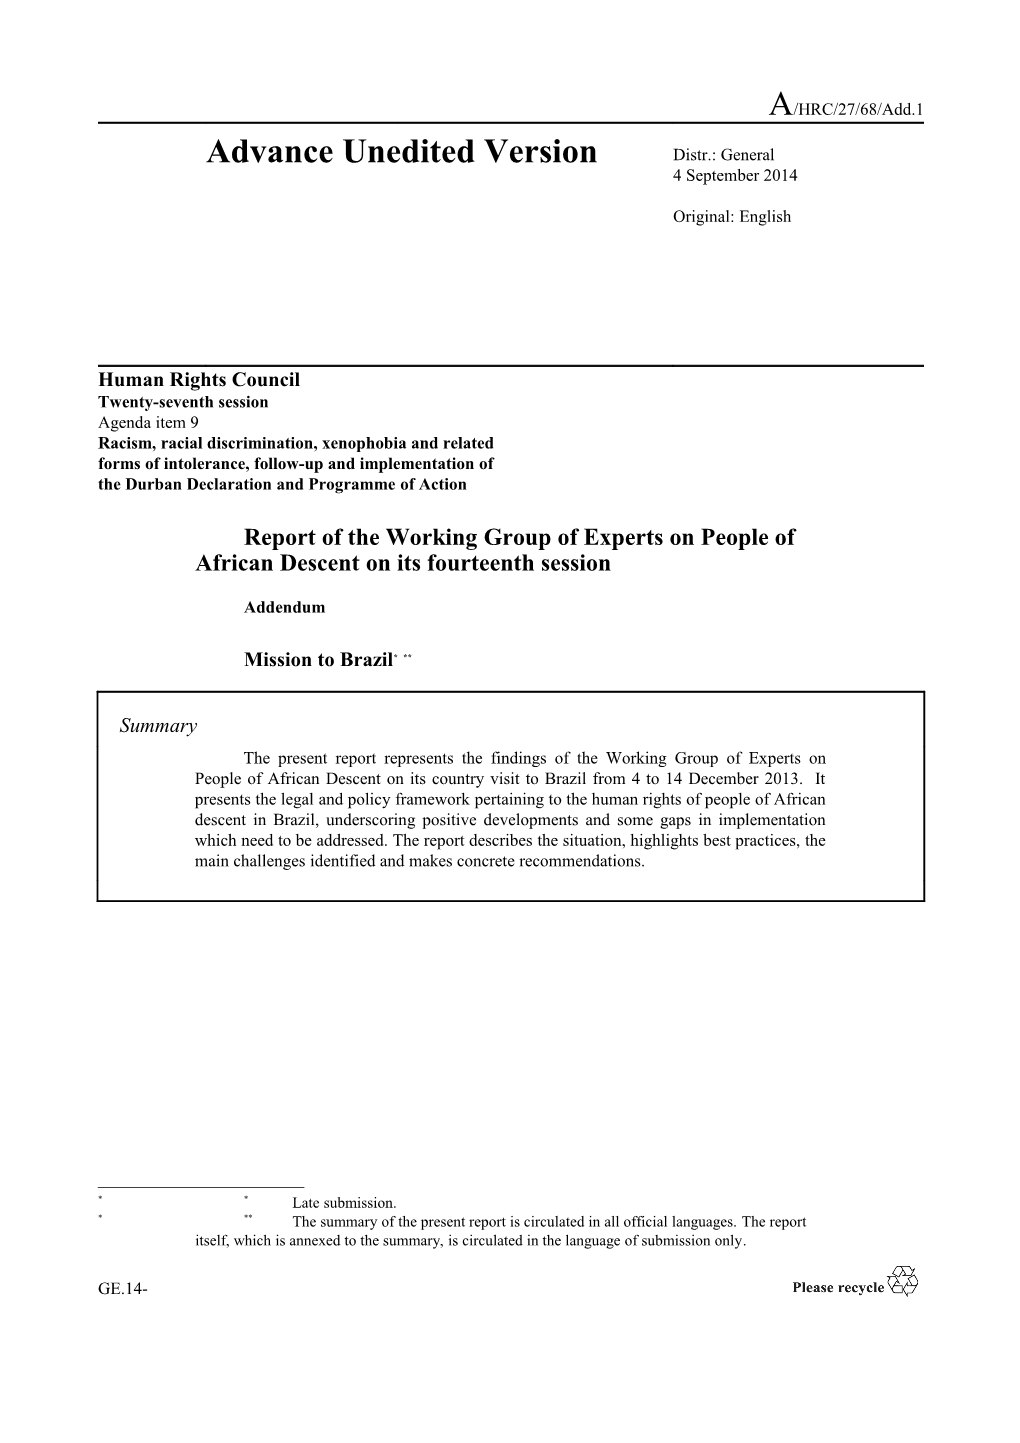 Report of the Working Group of Experts on People of African Descent on Its Thirteen And